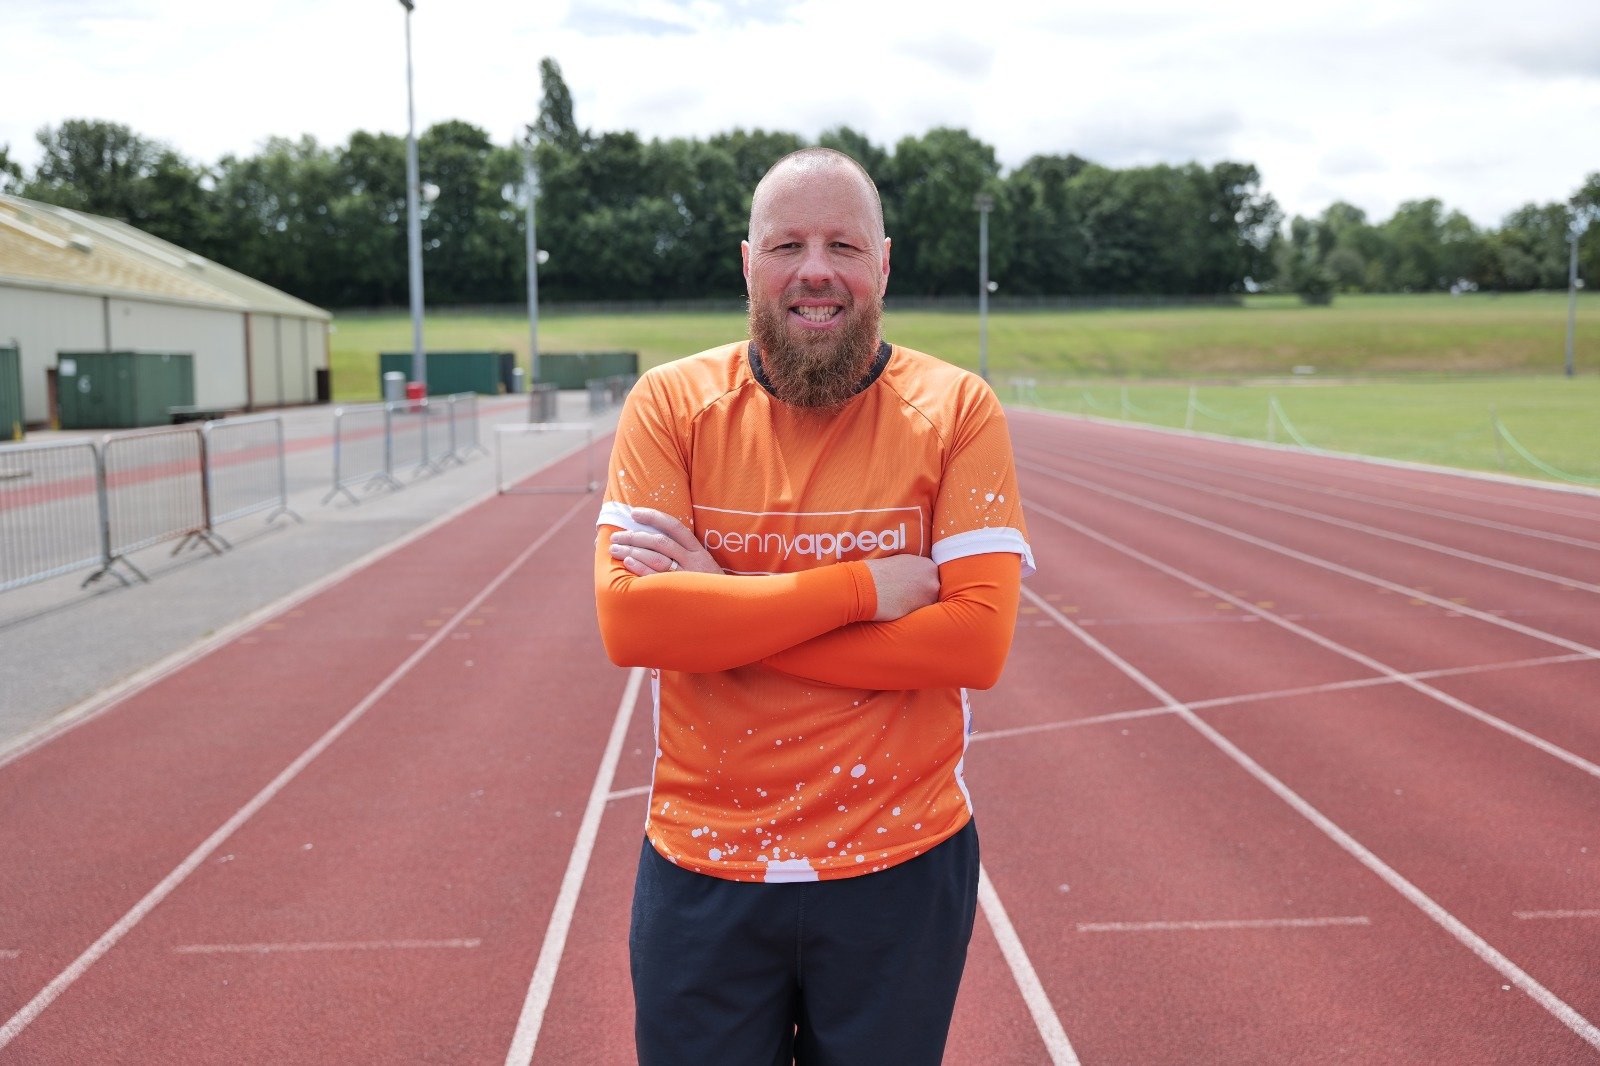 British man to run four major marathons to help people in crisis in Middle East